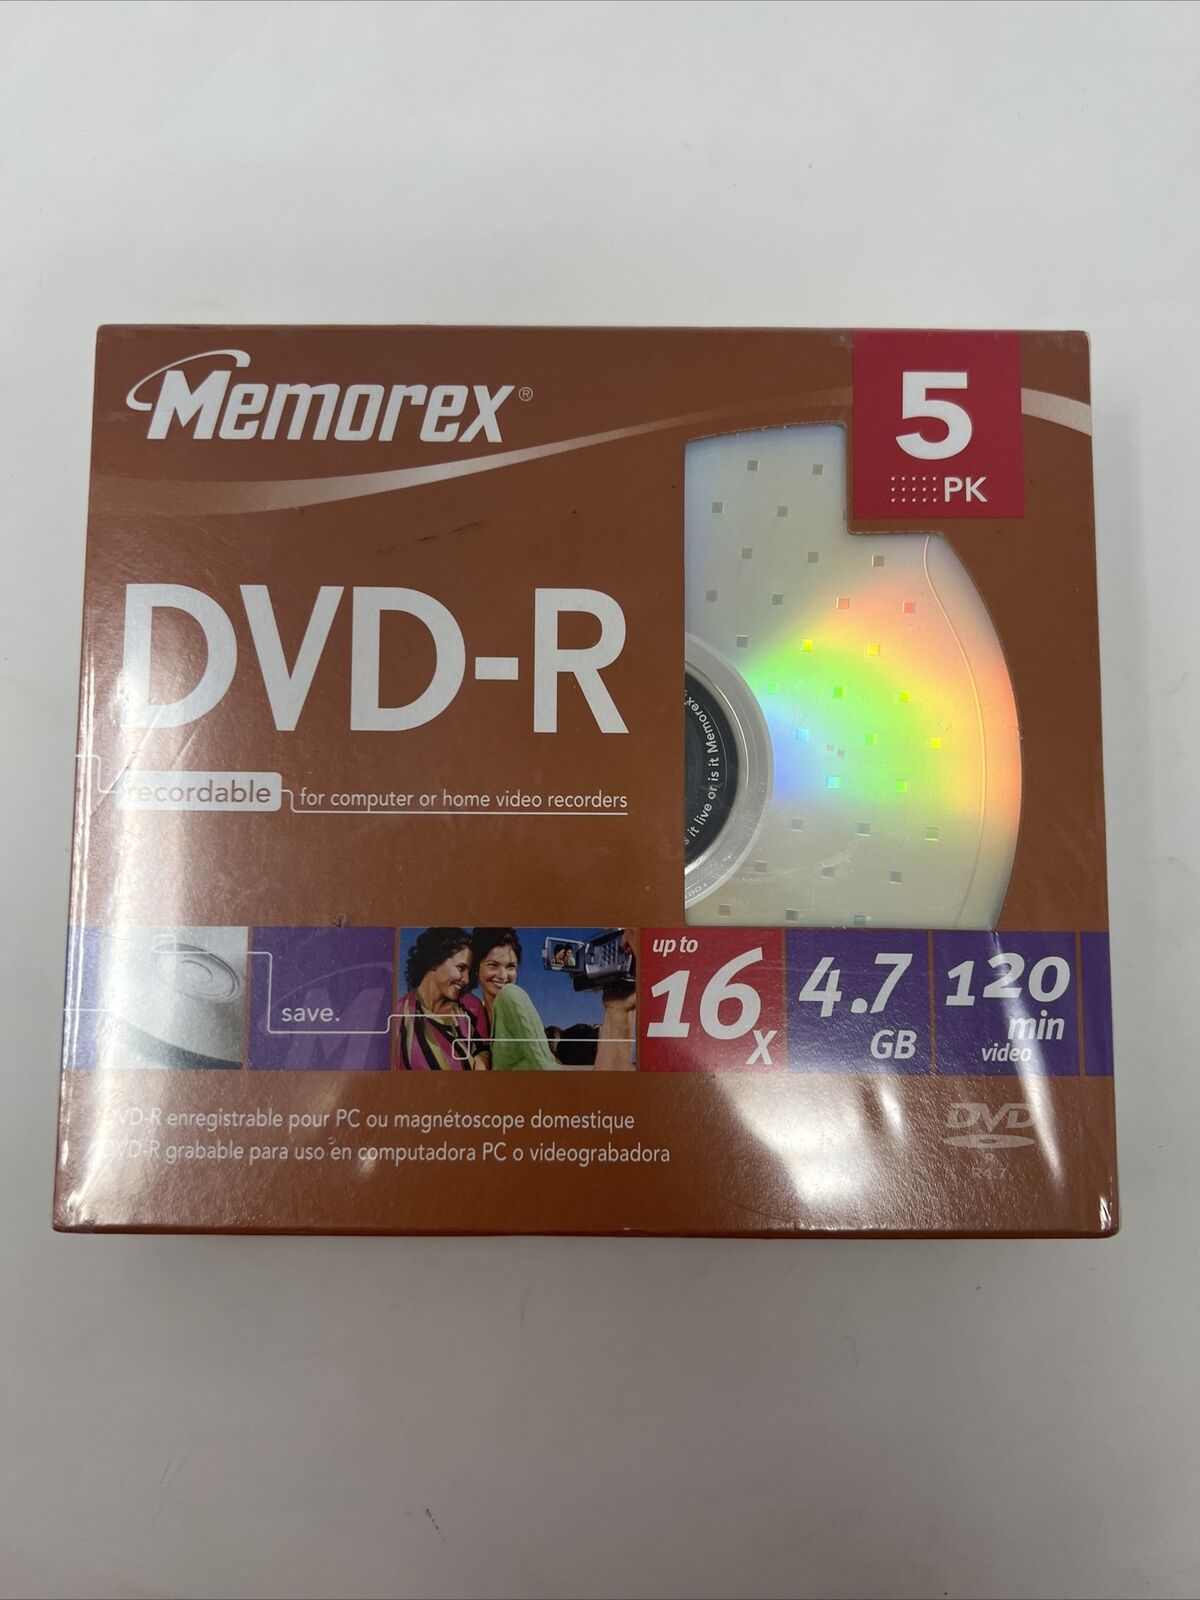 New Genuine Memorex DVD-R Blank Recordable Discs 16X 4.7GB 120Min 5-Pack w/cases